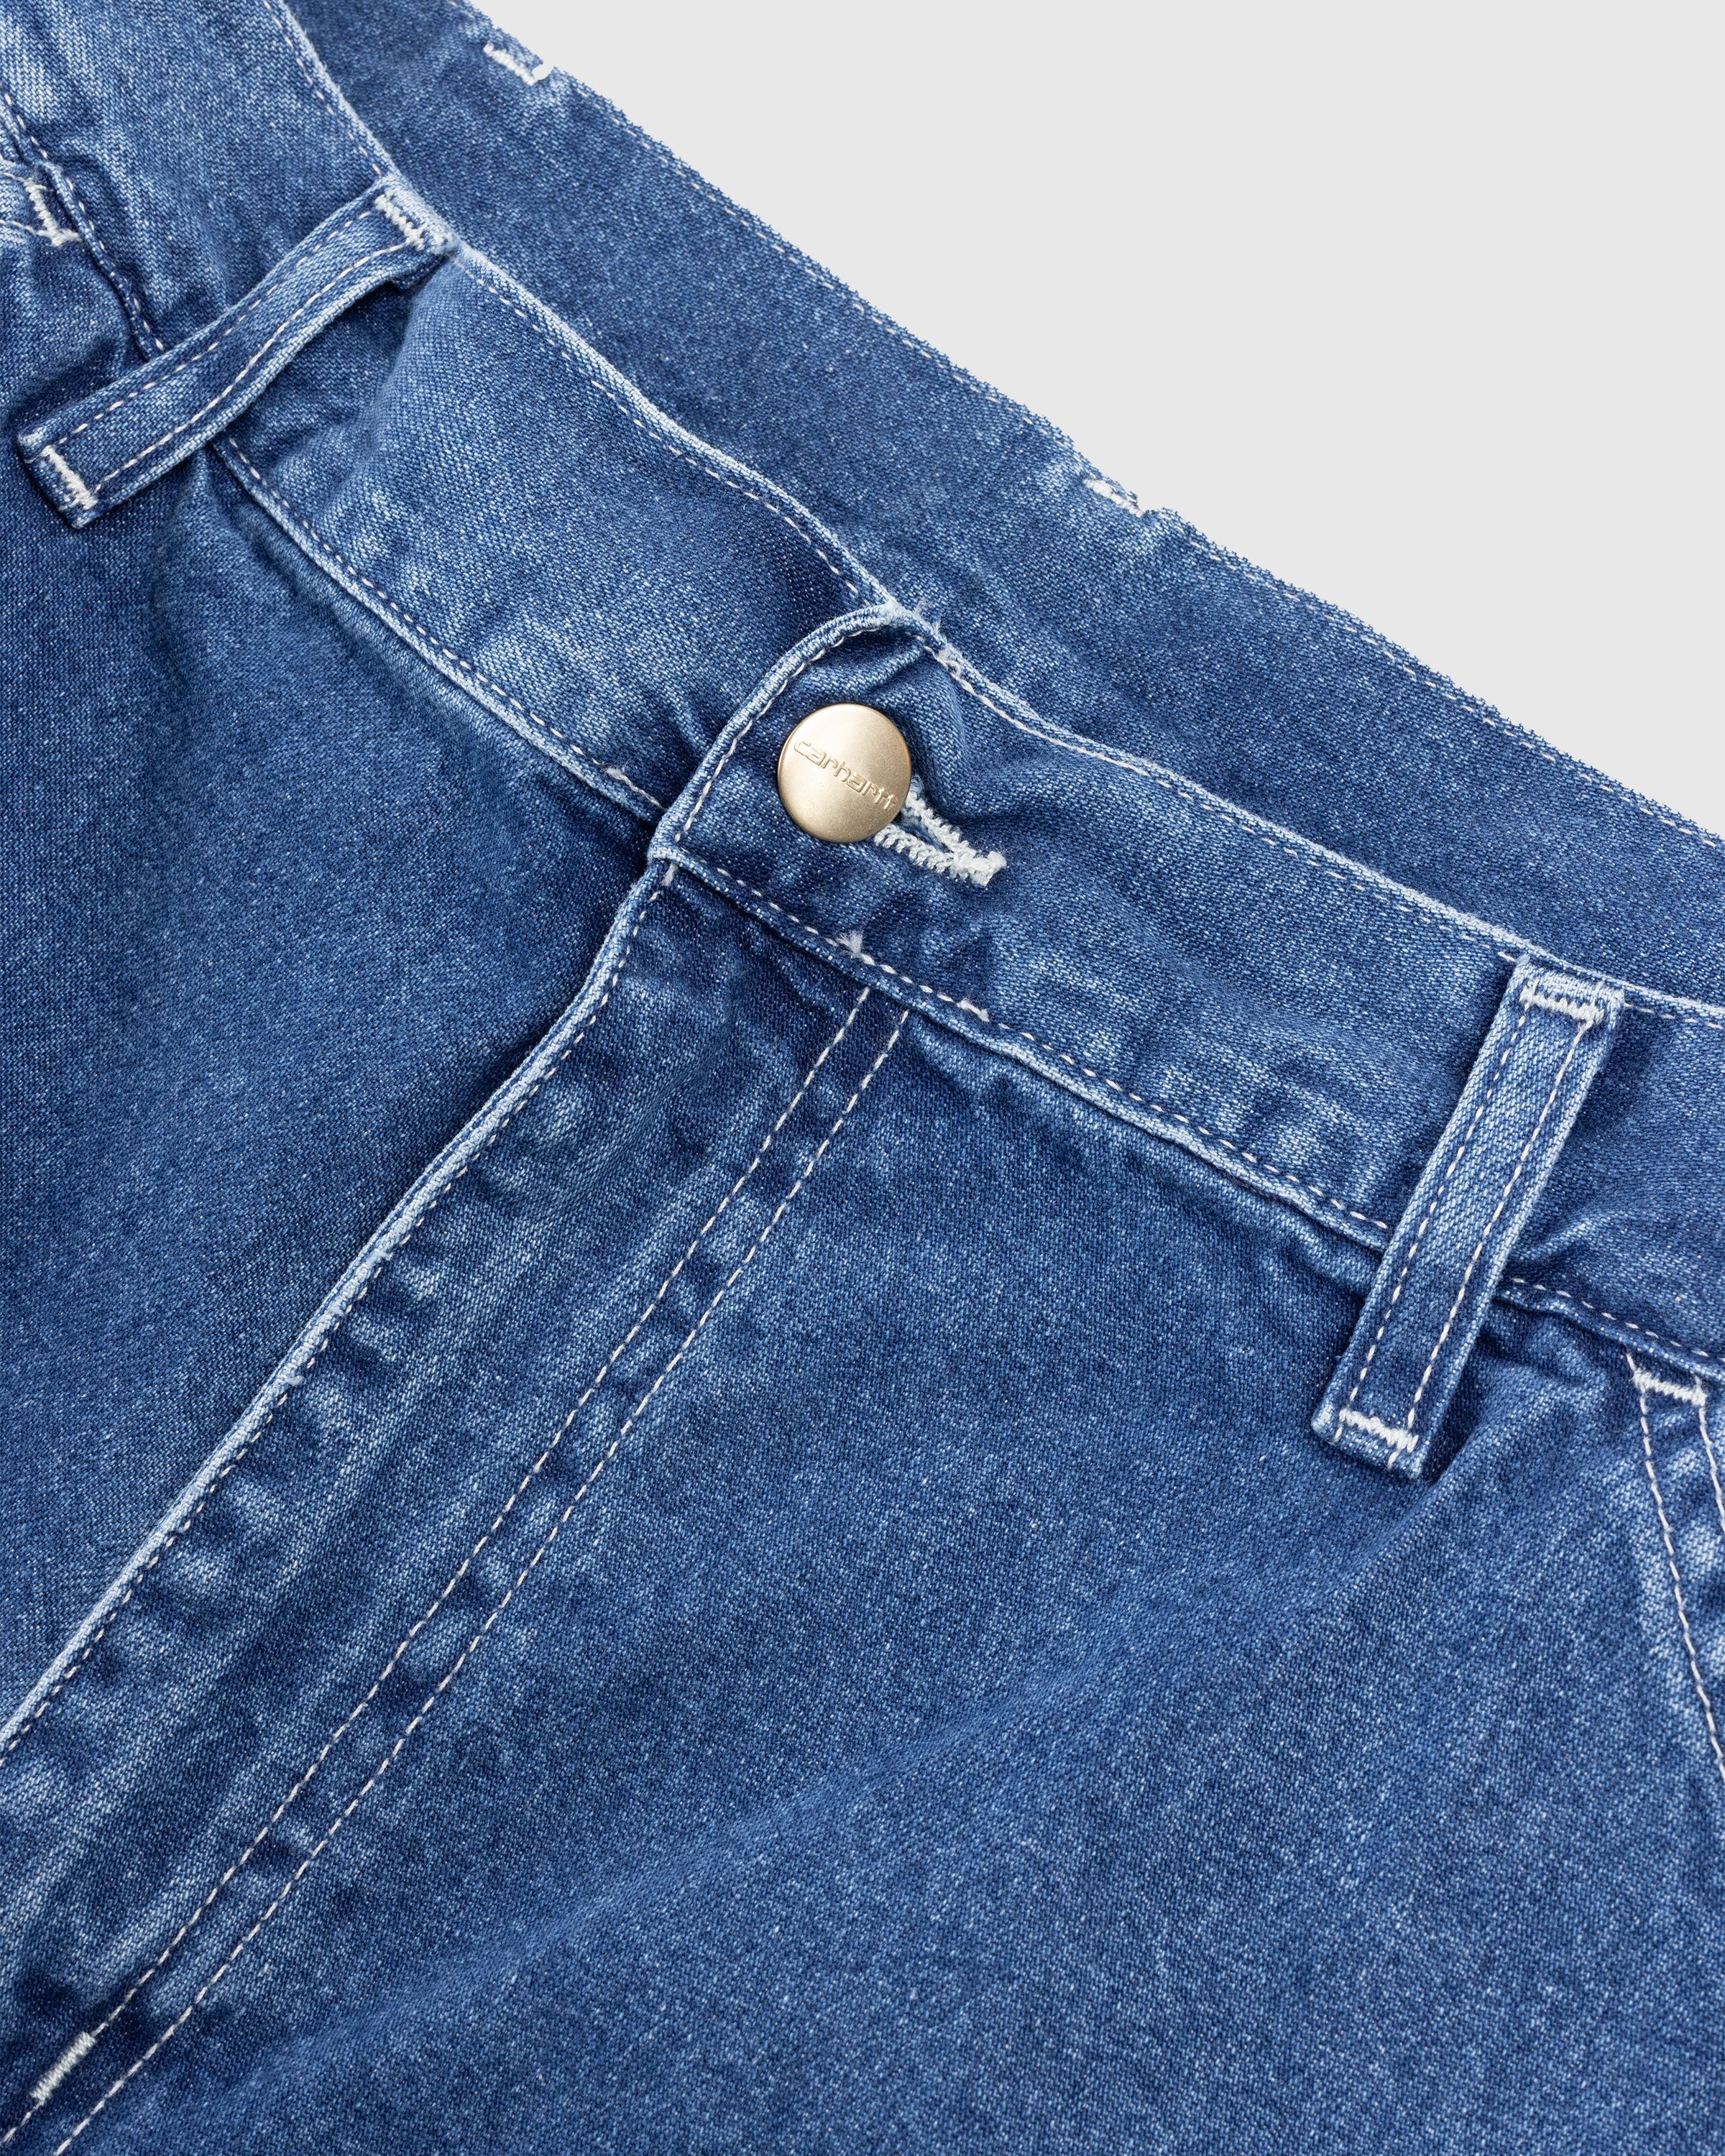 Carhartt WIP - Simple Pant Blue/Stone-Washed - Clothing - Blue - Image 5